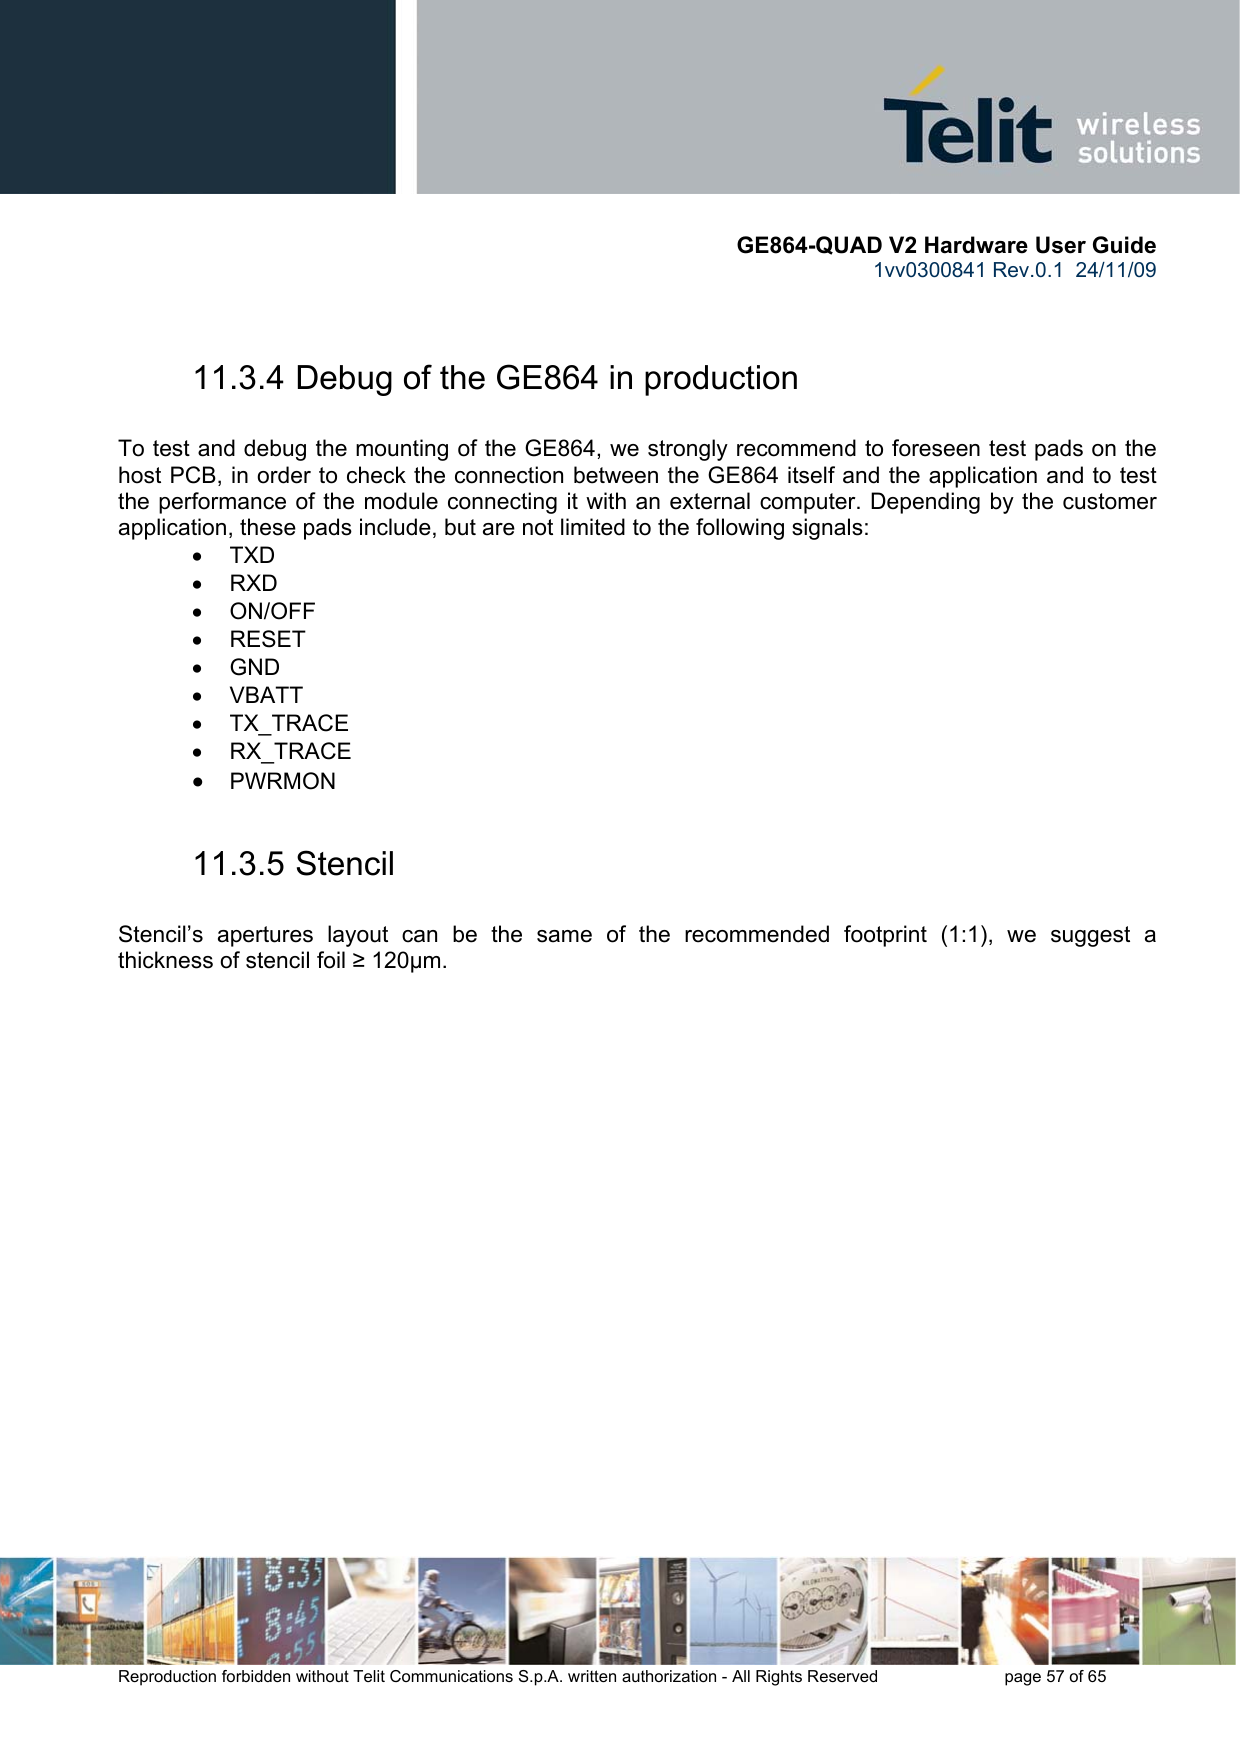       GE864-QUAD V2 Hardware User Guide 1vv0300841 Rev.0.1  24/11/09      Reproduction forbidden without Telit Communications S.p.A. written authorization - All Rights Reserved    page 57 of 65   11.3.4 Debug of the GE864 in production  To test and debug the mounting of the GE864, we strongly recommend to foreseen test pads on the host PCB, in order to check the connection between the GE864 itself and the application and to test the performance of the module connecting it with an external computer. Depending by the customer application, these pads include, but are not limited to the following signals: • TXD • RXD • ON/OFF • RESET • GND • VBATT • TX_TRACE • RX_TRACE • PWRMON  11.3.5 Stencil  Stencil’s apertures layout can be the same of the recommended footprint (1:1), we suggest a thickness of stencil foil ≥ 120µm. 